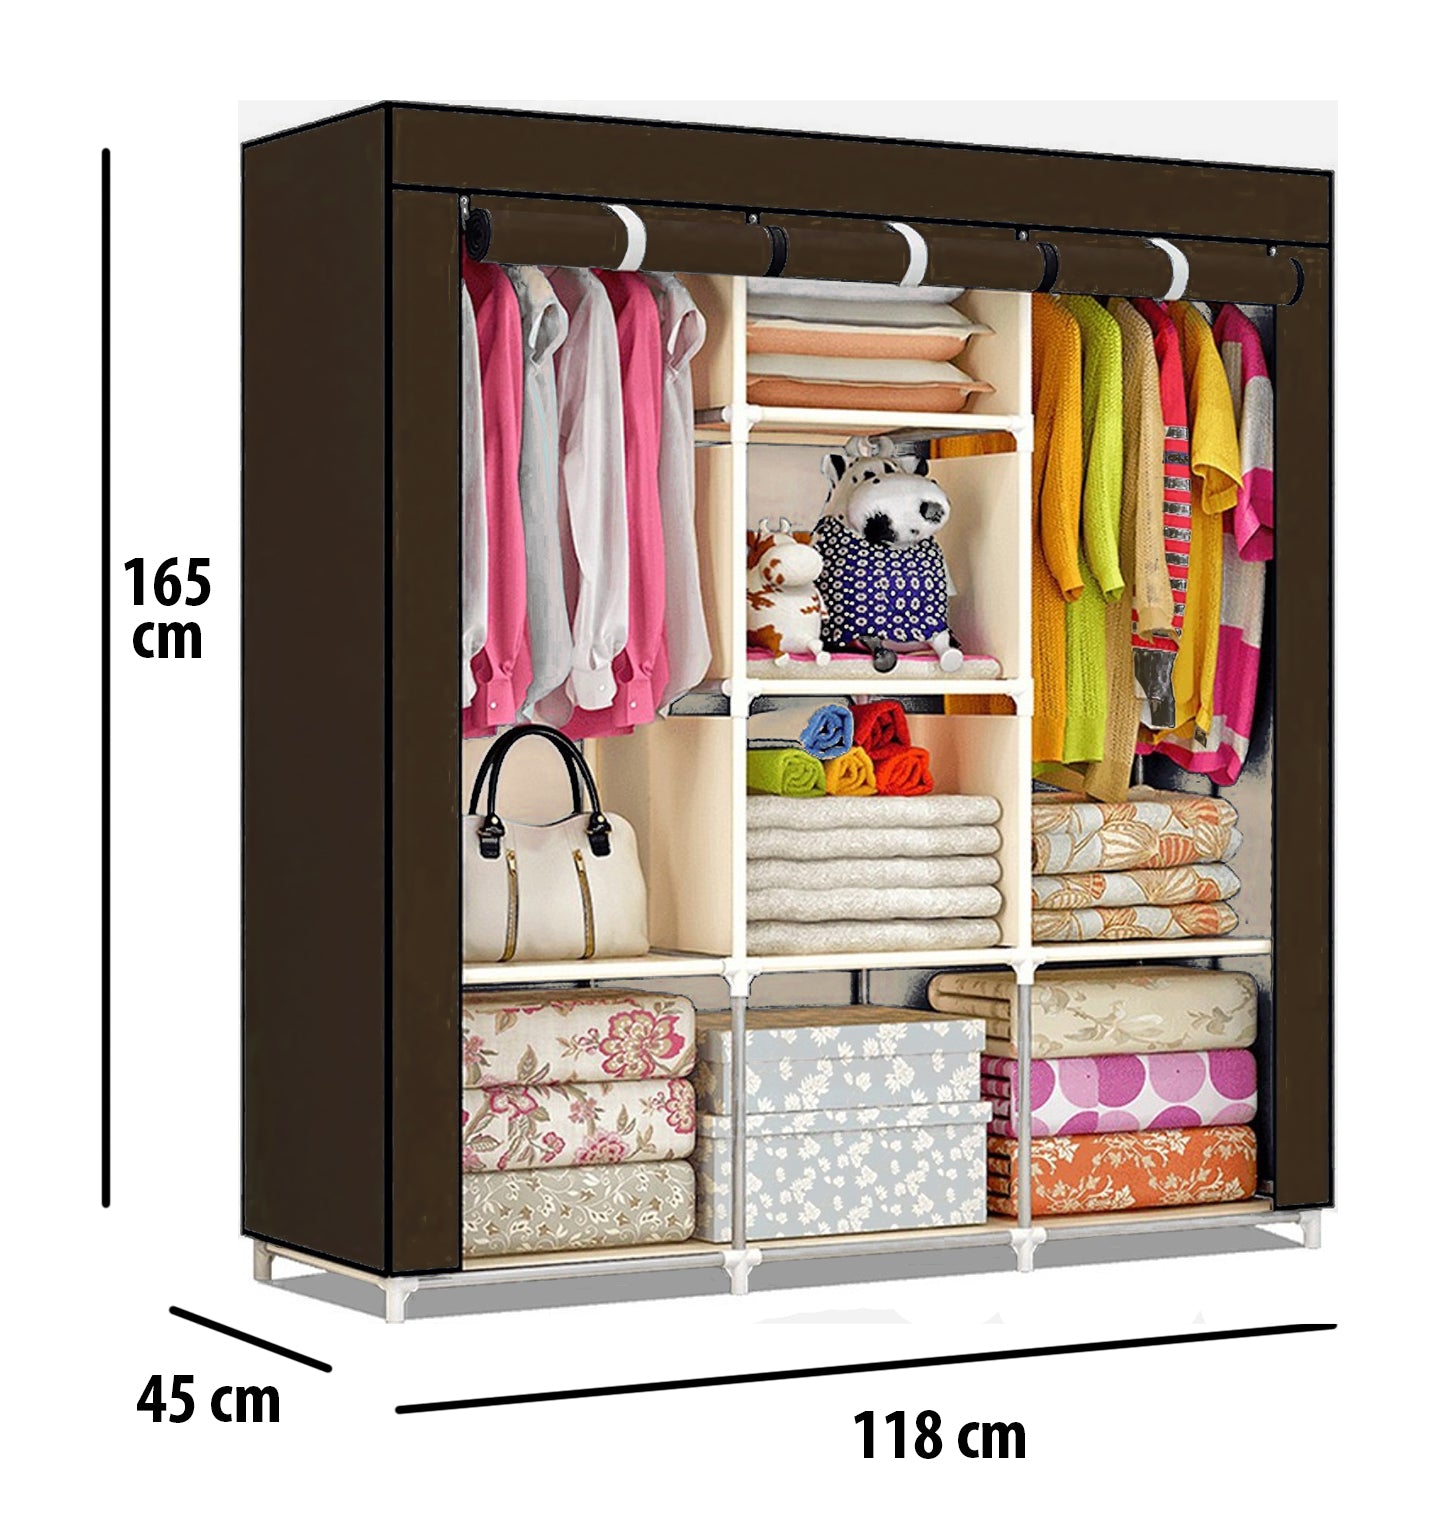 Fancy and Portable Fabric Foldable 3 Door Collapsible Wardrobe - 88130A-BR